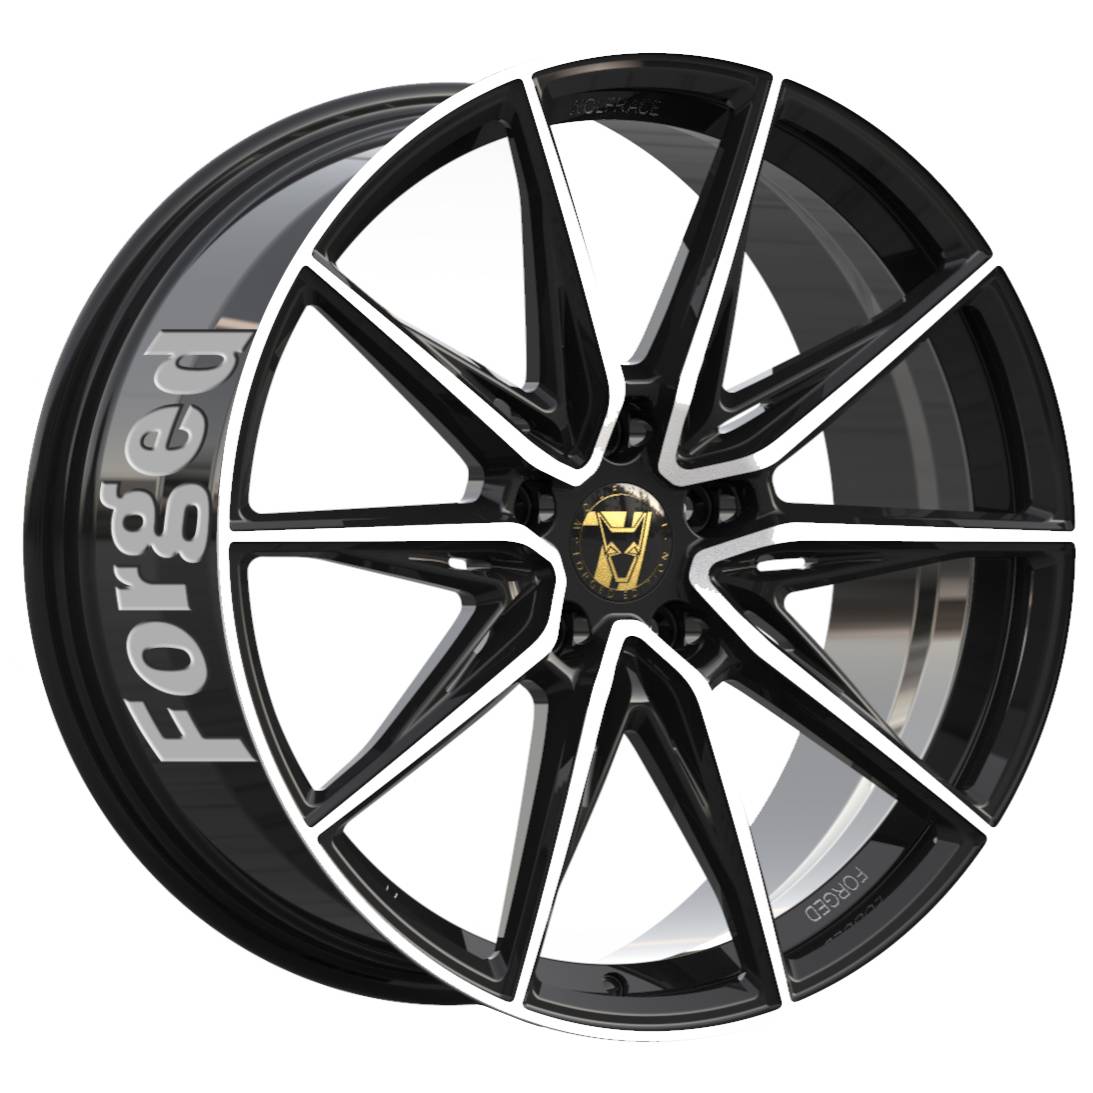 Demon Wheels 71 Forged Edition Urban Racer Forged [9.5x23] -5x114.3- ET 35